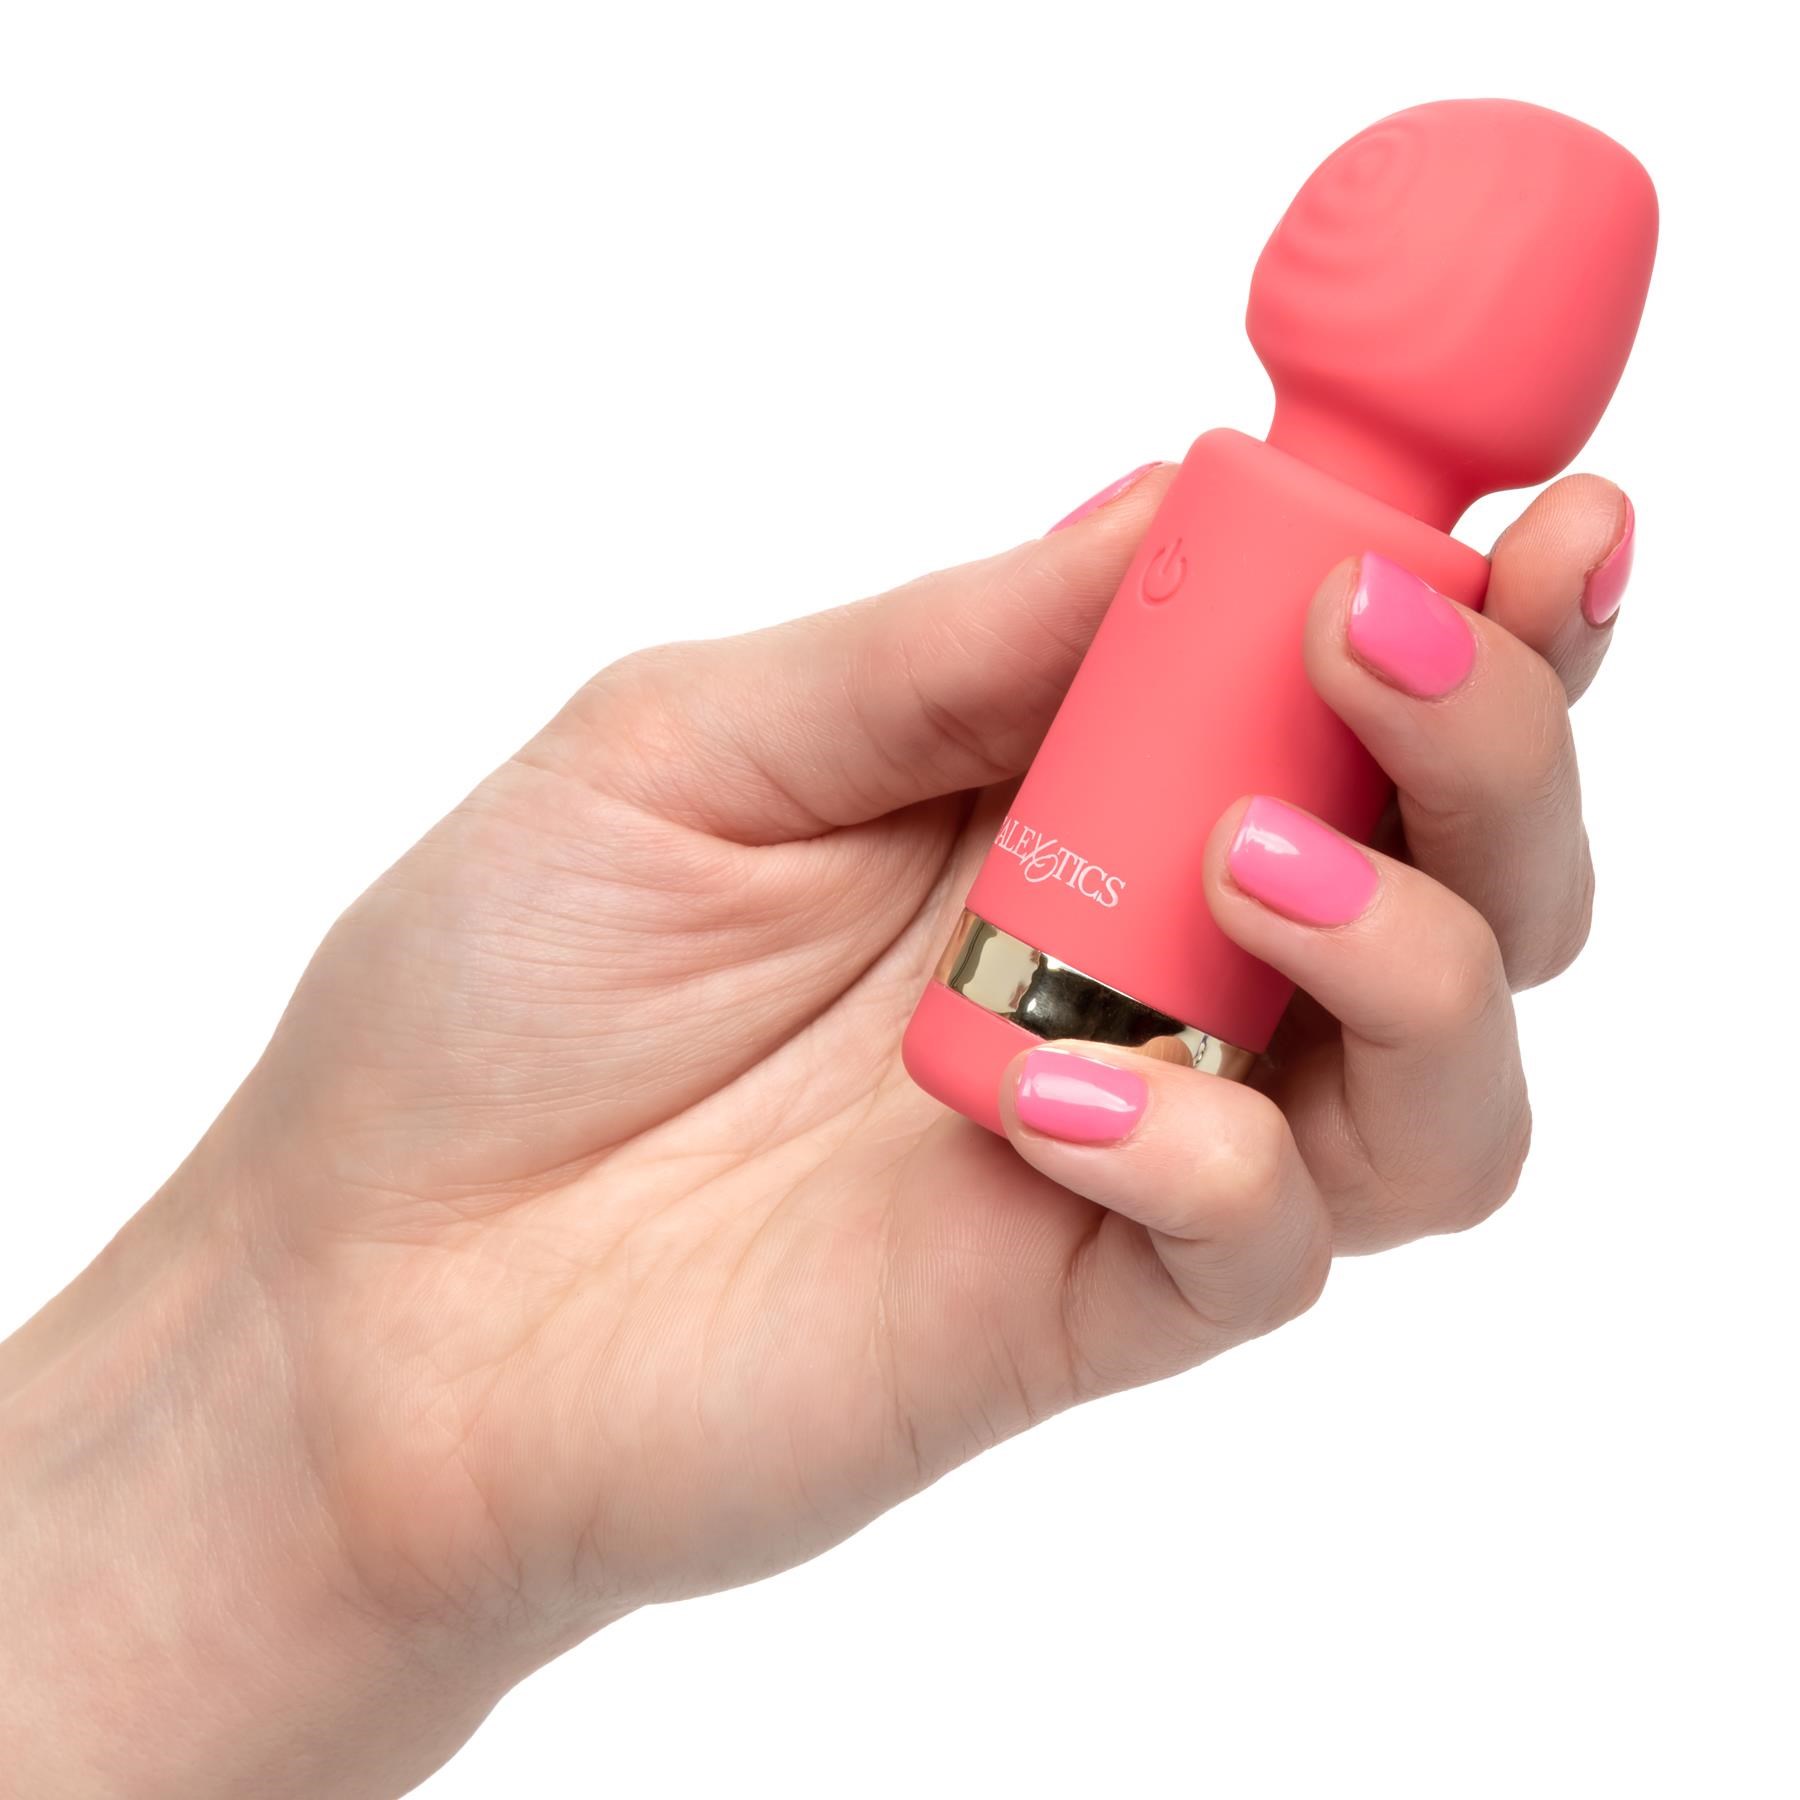 Slay #ExciteMe Mini Wand Massager - Hand Shot to Show Size